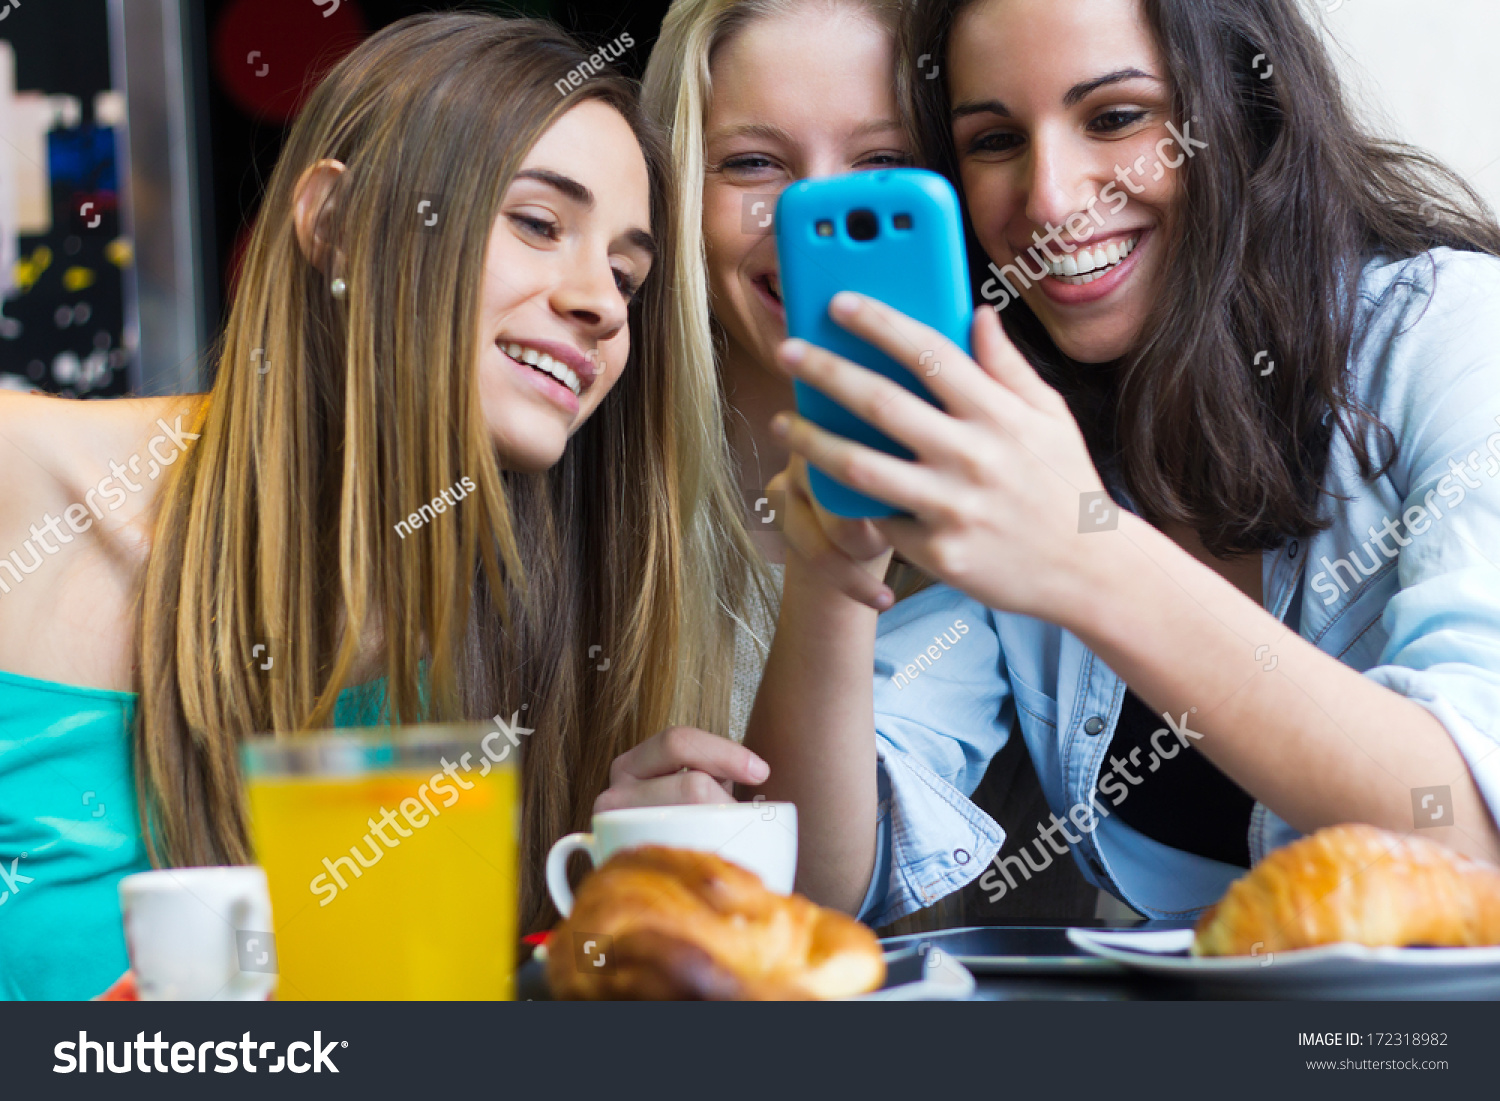 A group of friends having fun with smartphones #172318982